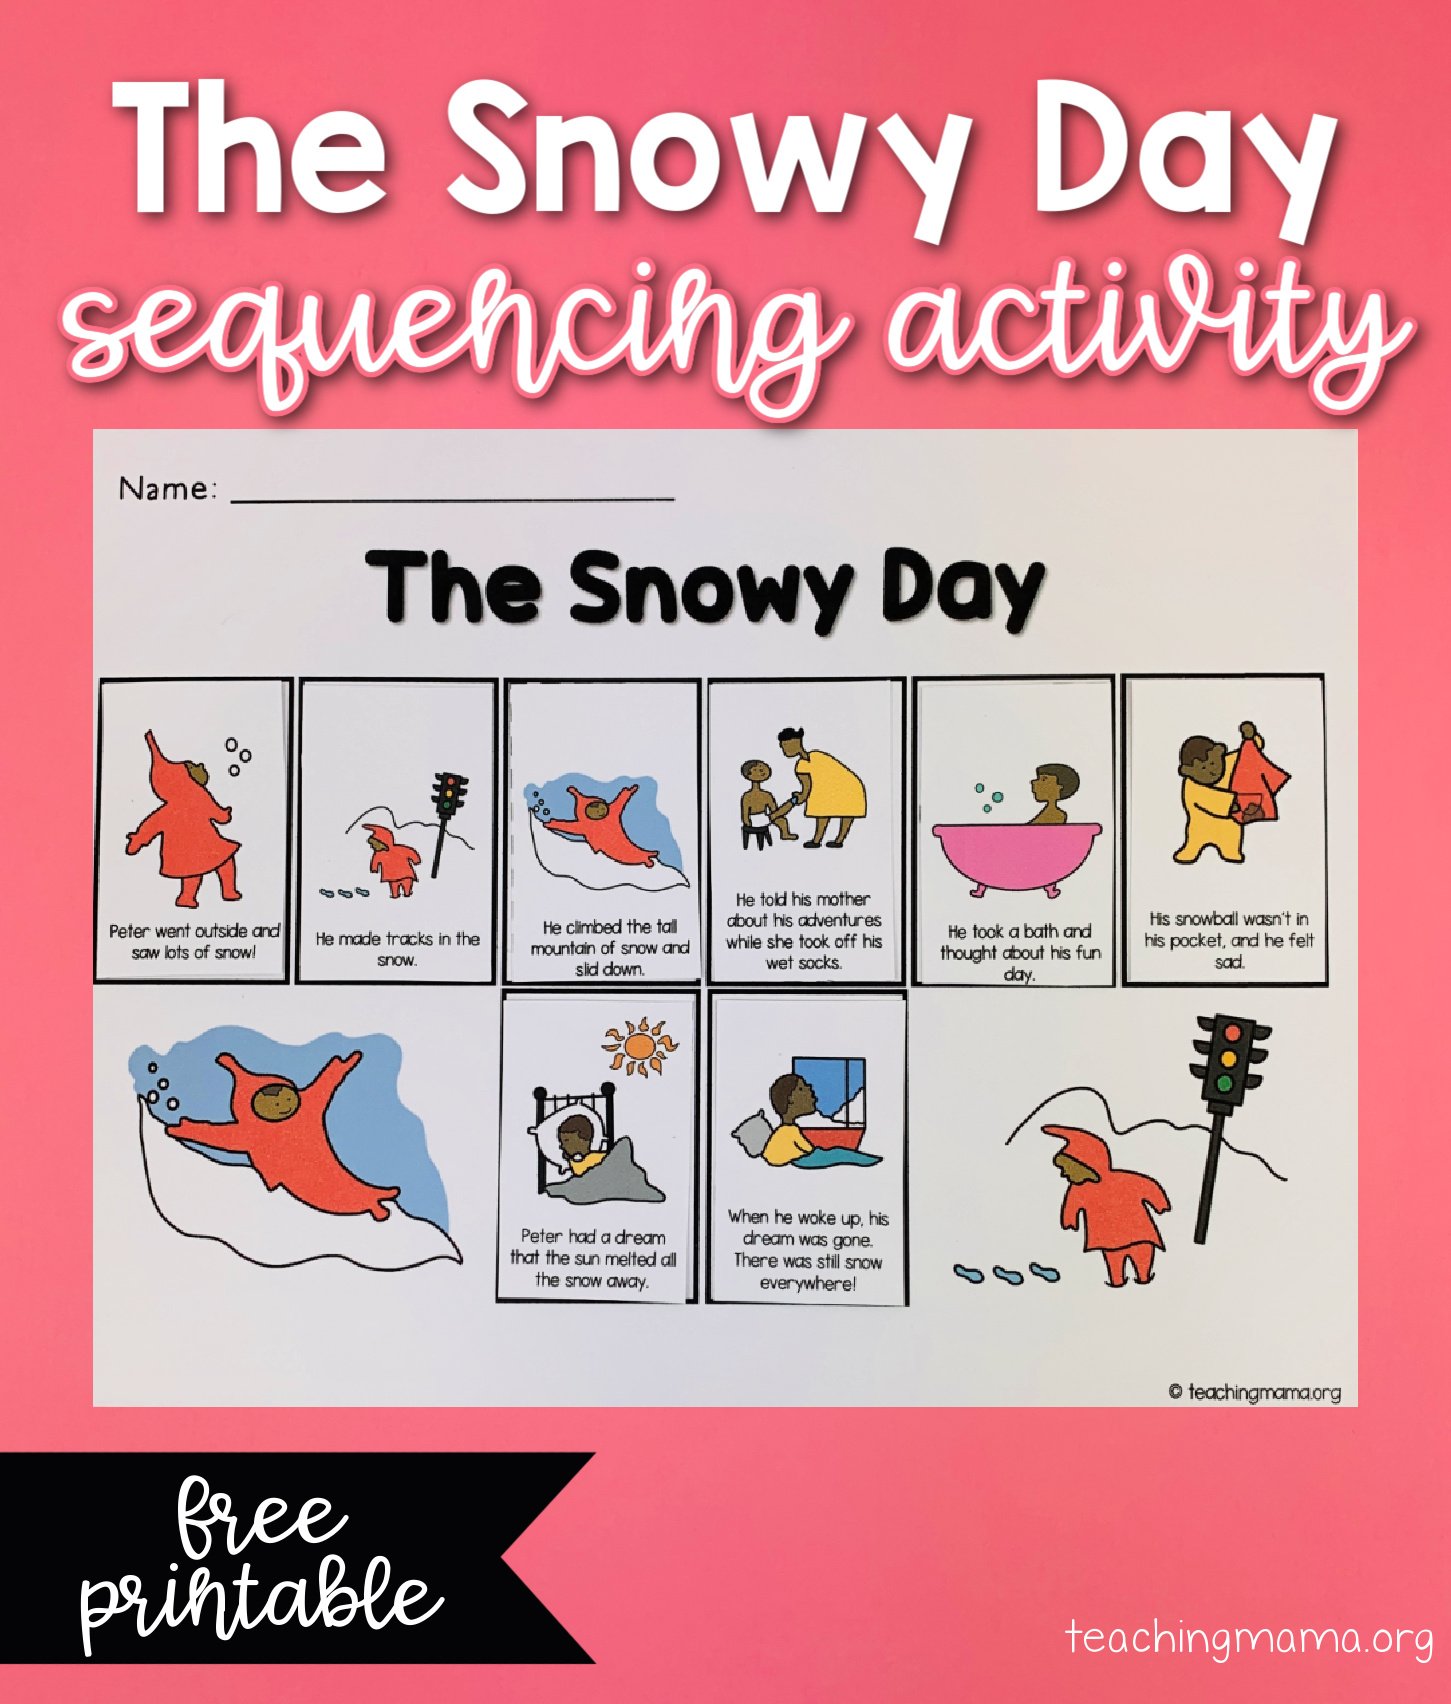 the snowy day - sequence activity cards